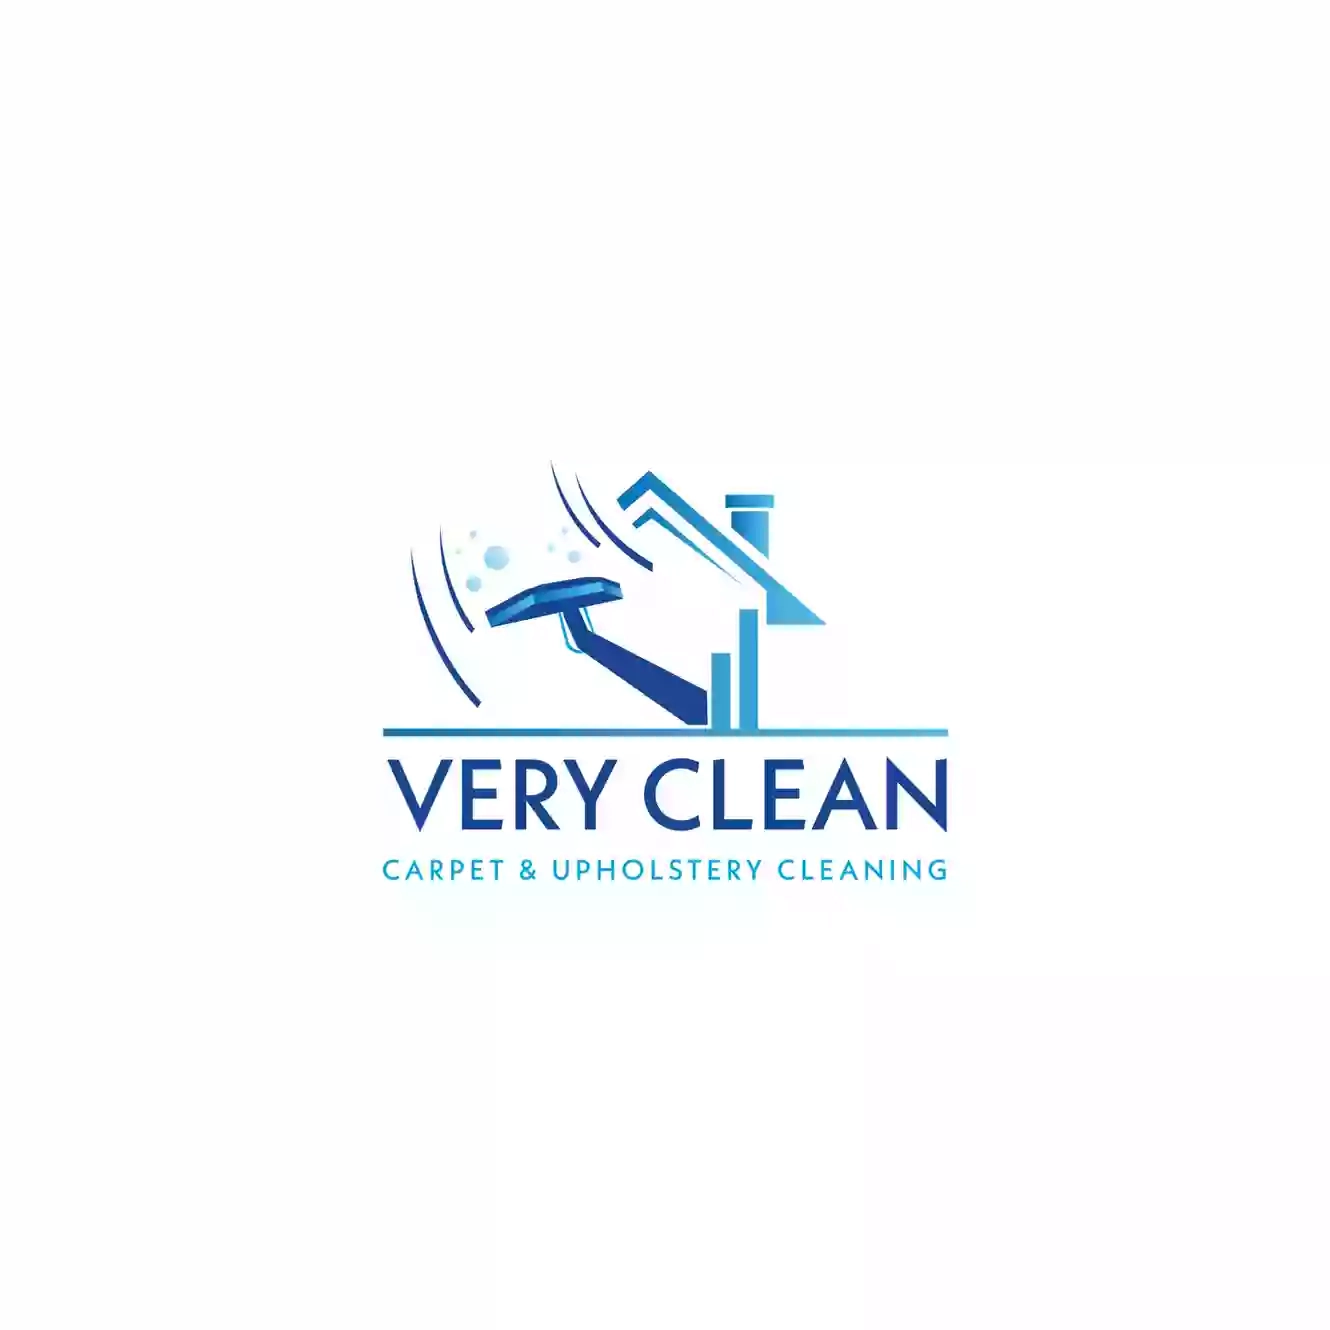 VeryClean Carpets and Upholstery Cleaning